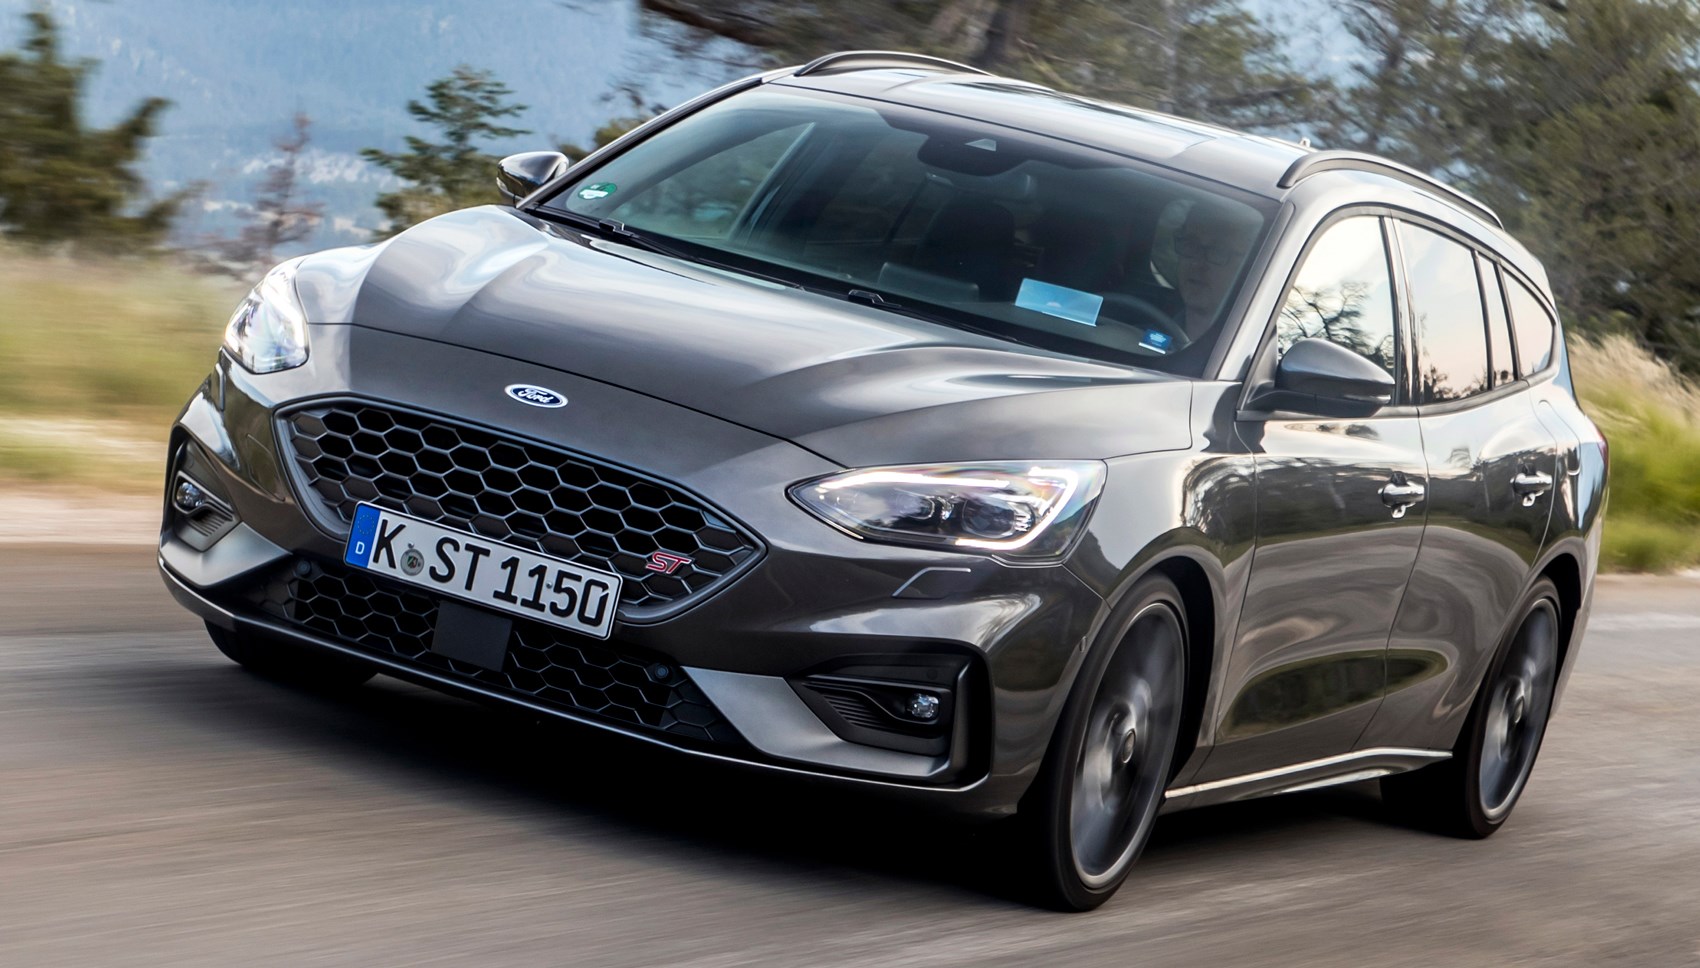 Ford Focus St 19 Review Diesel And Estate Versions Driven Car Magazine